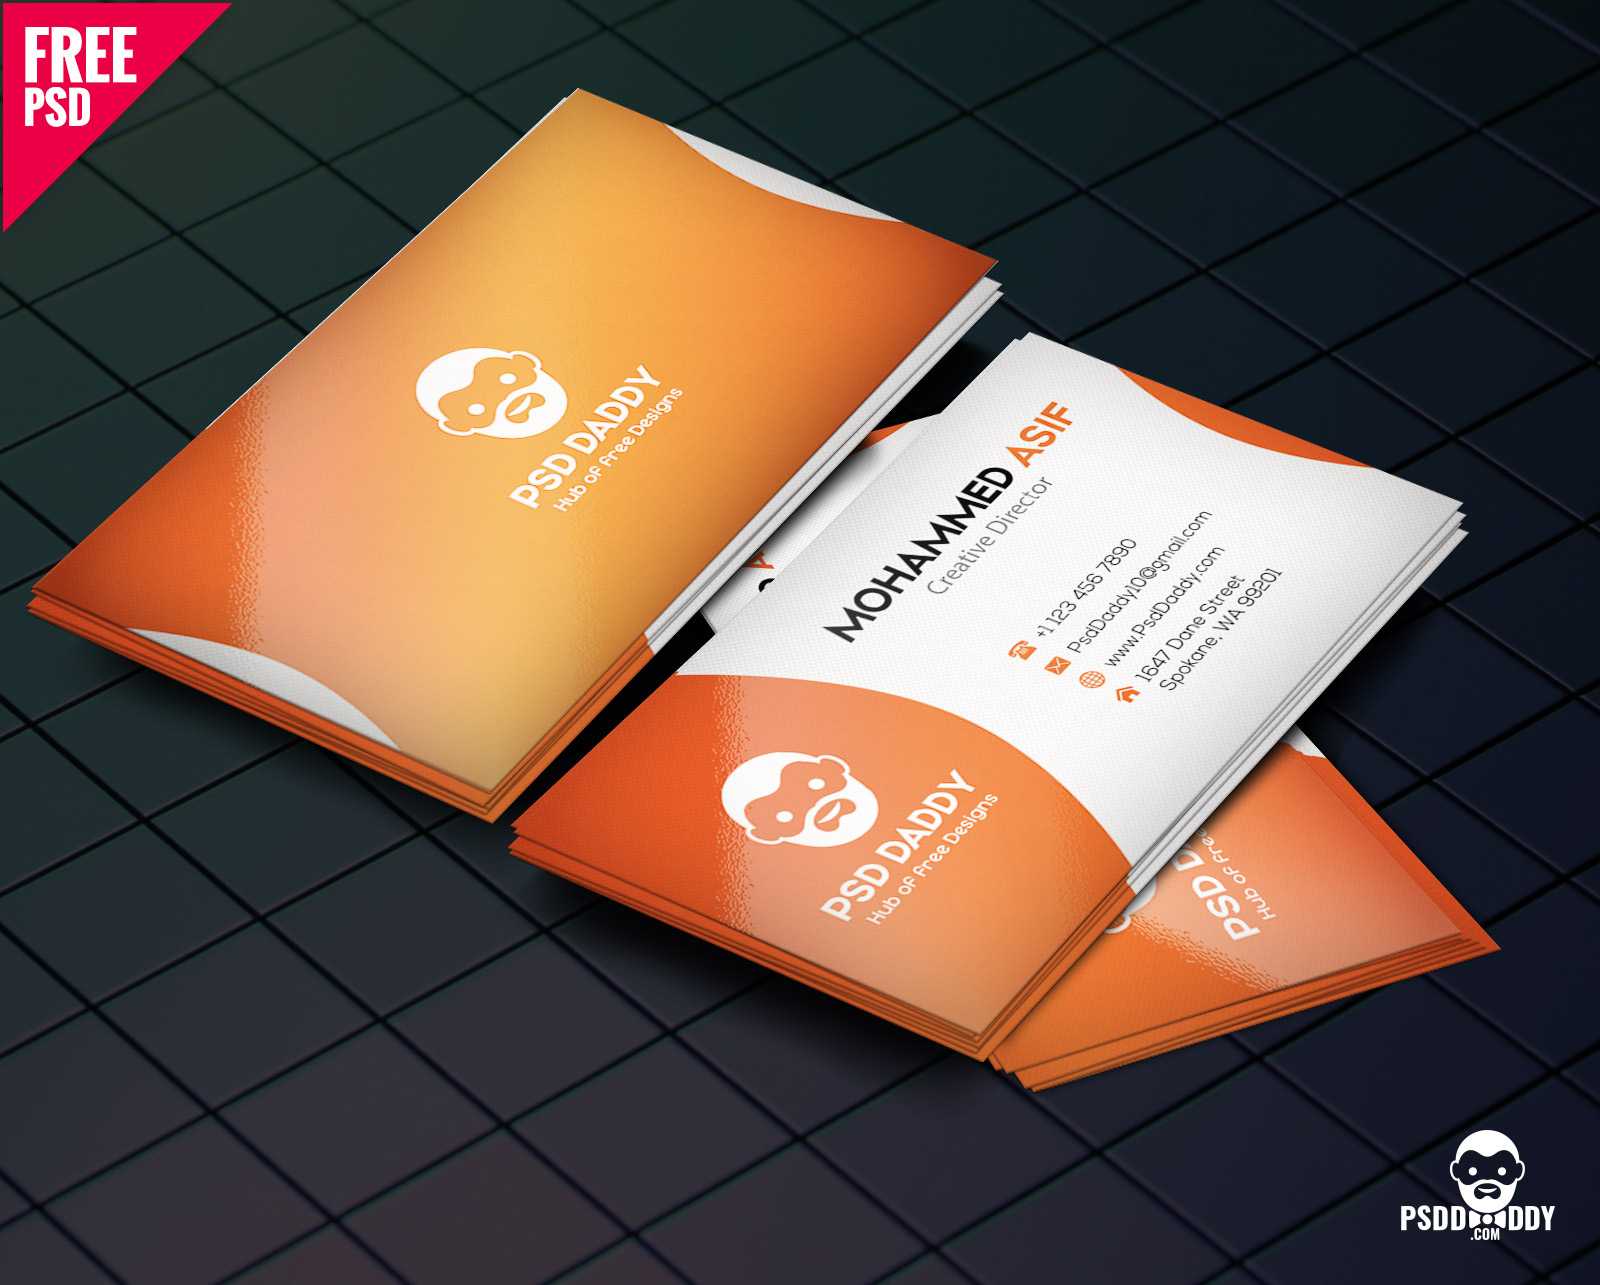 Download] Business Card Design Psd Free | Psddaddy Regarding Visiting Card Psd Template Free Download